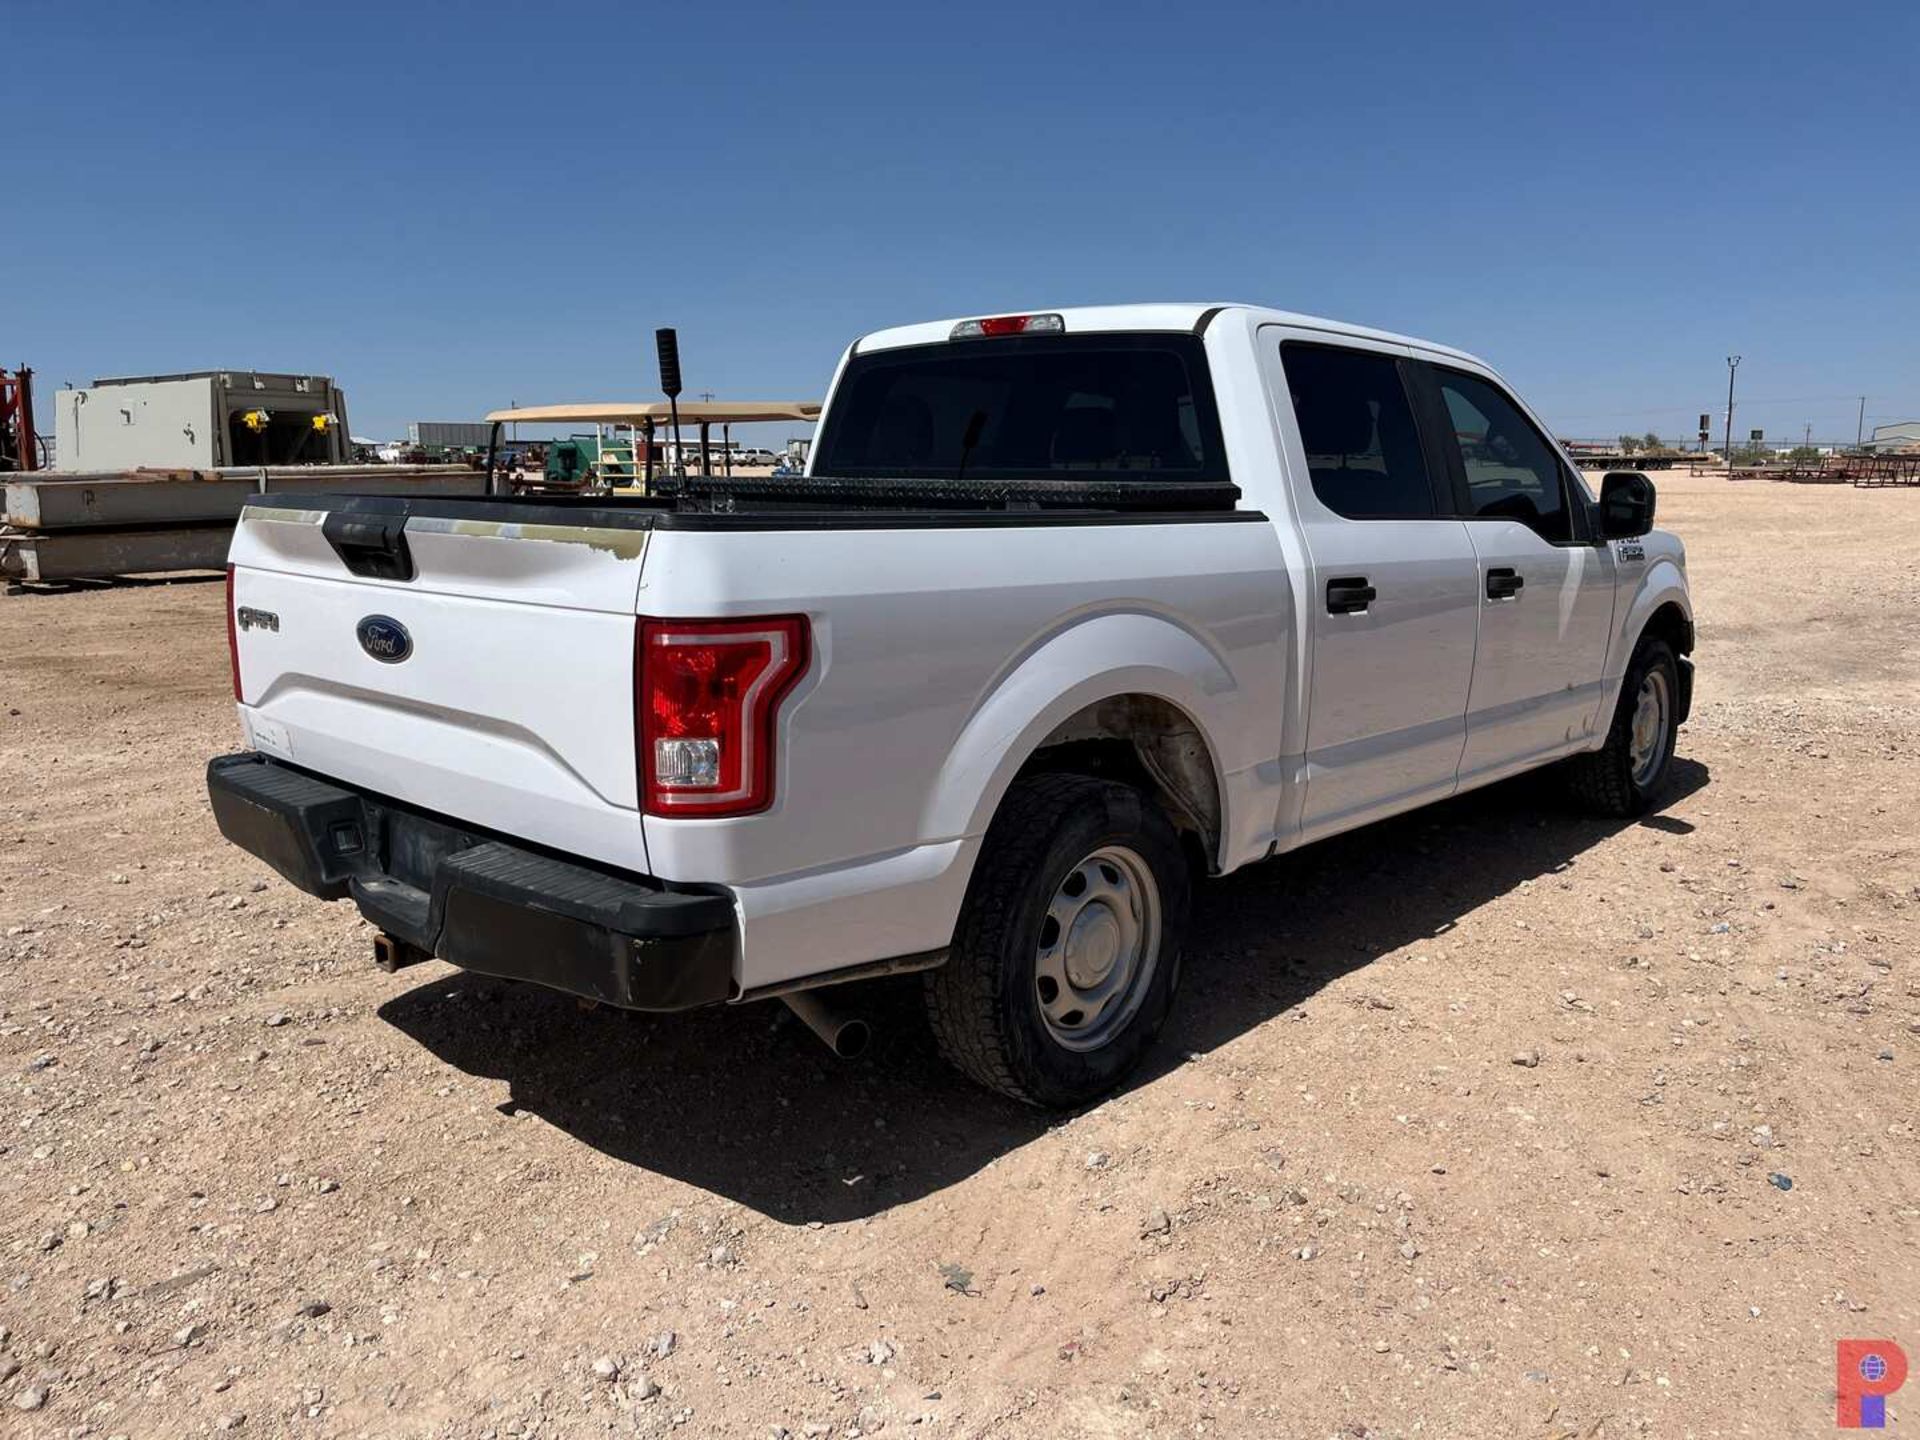 2017 FORD F-150 CREW CAB PICKUP TRUCK - Image 3 of 7